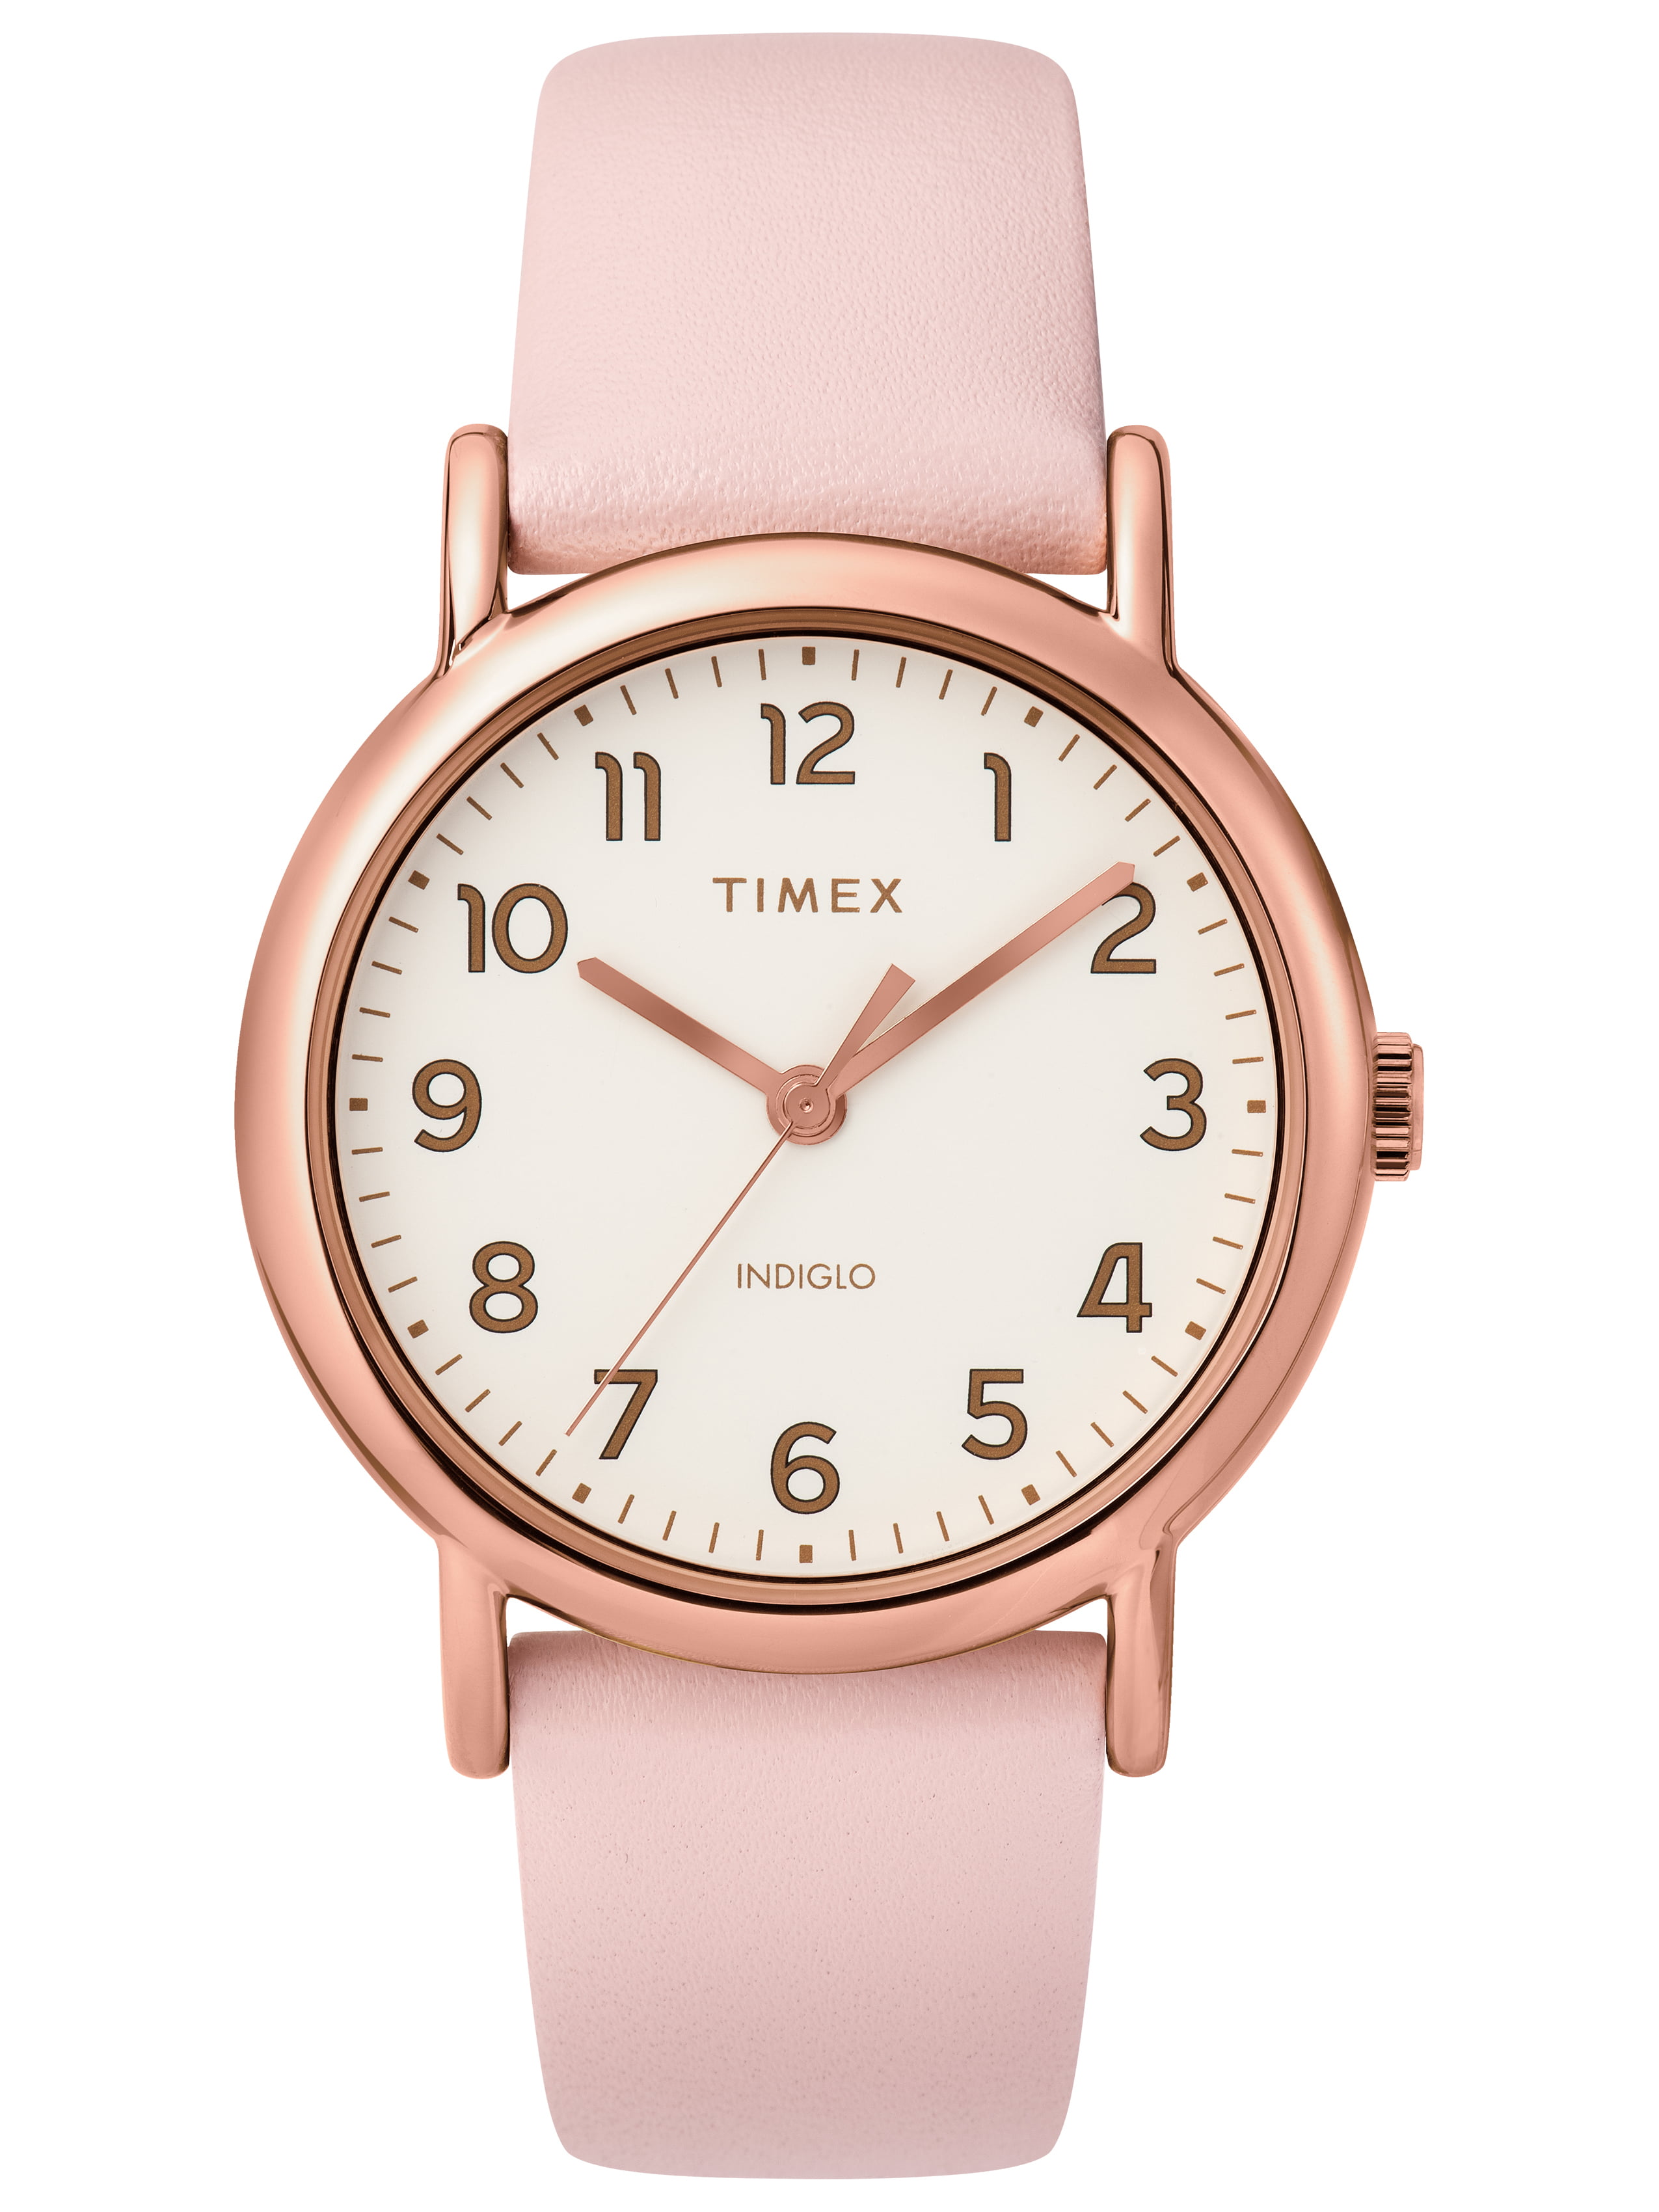 Timex Women's Weekender 38mm Pink/Rose Gold Leather Two-Piece Strap Watch